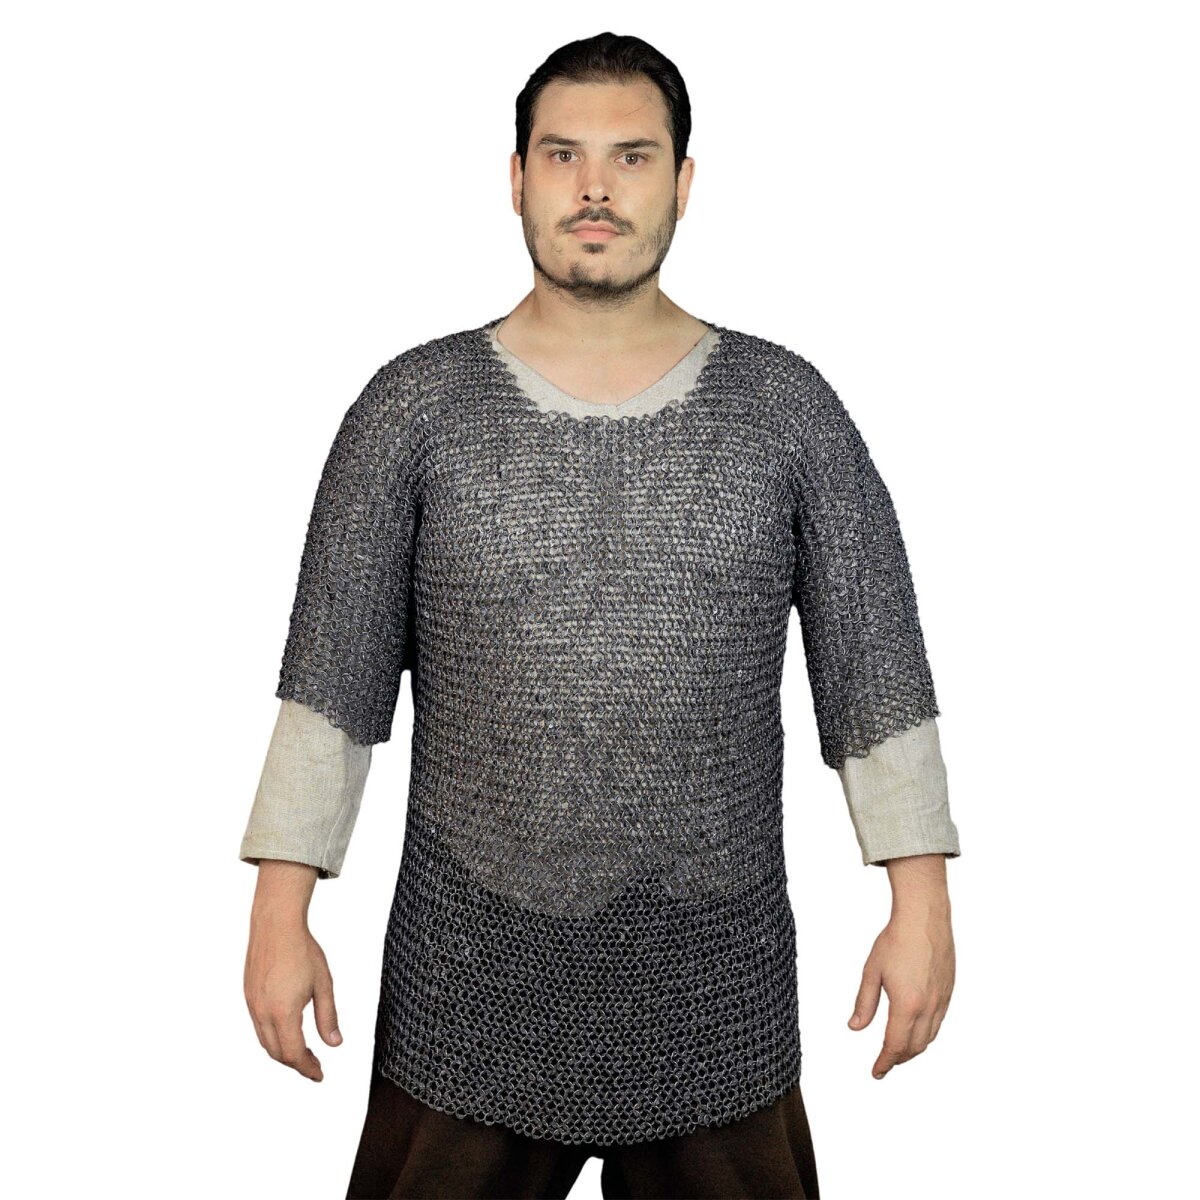 Round Ring Chainmail Medieval Half Sleeves Shirt...